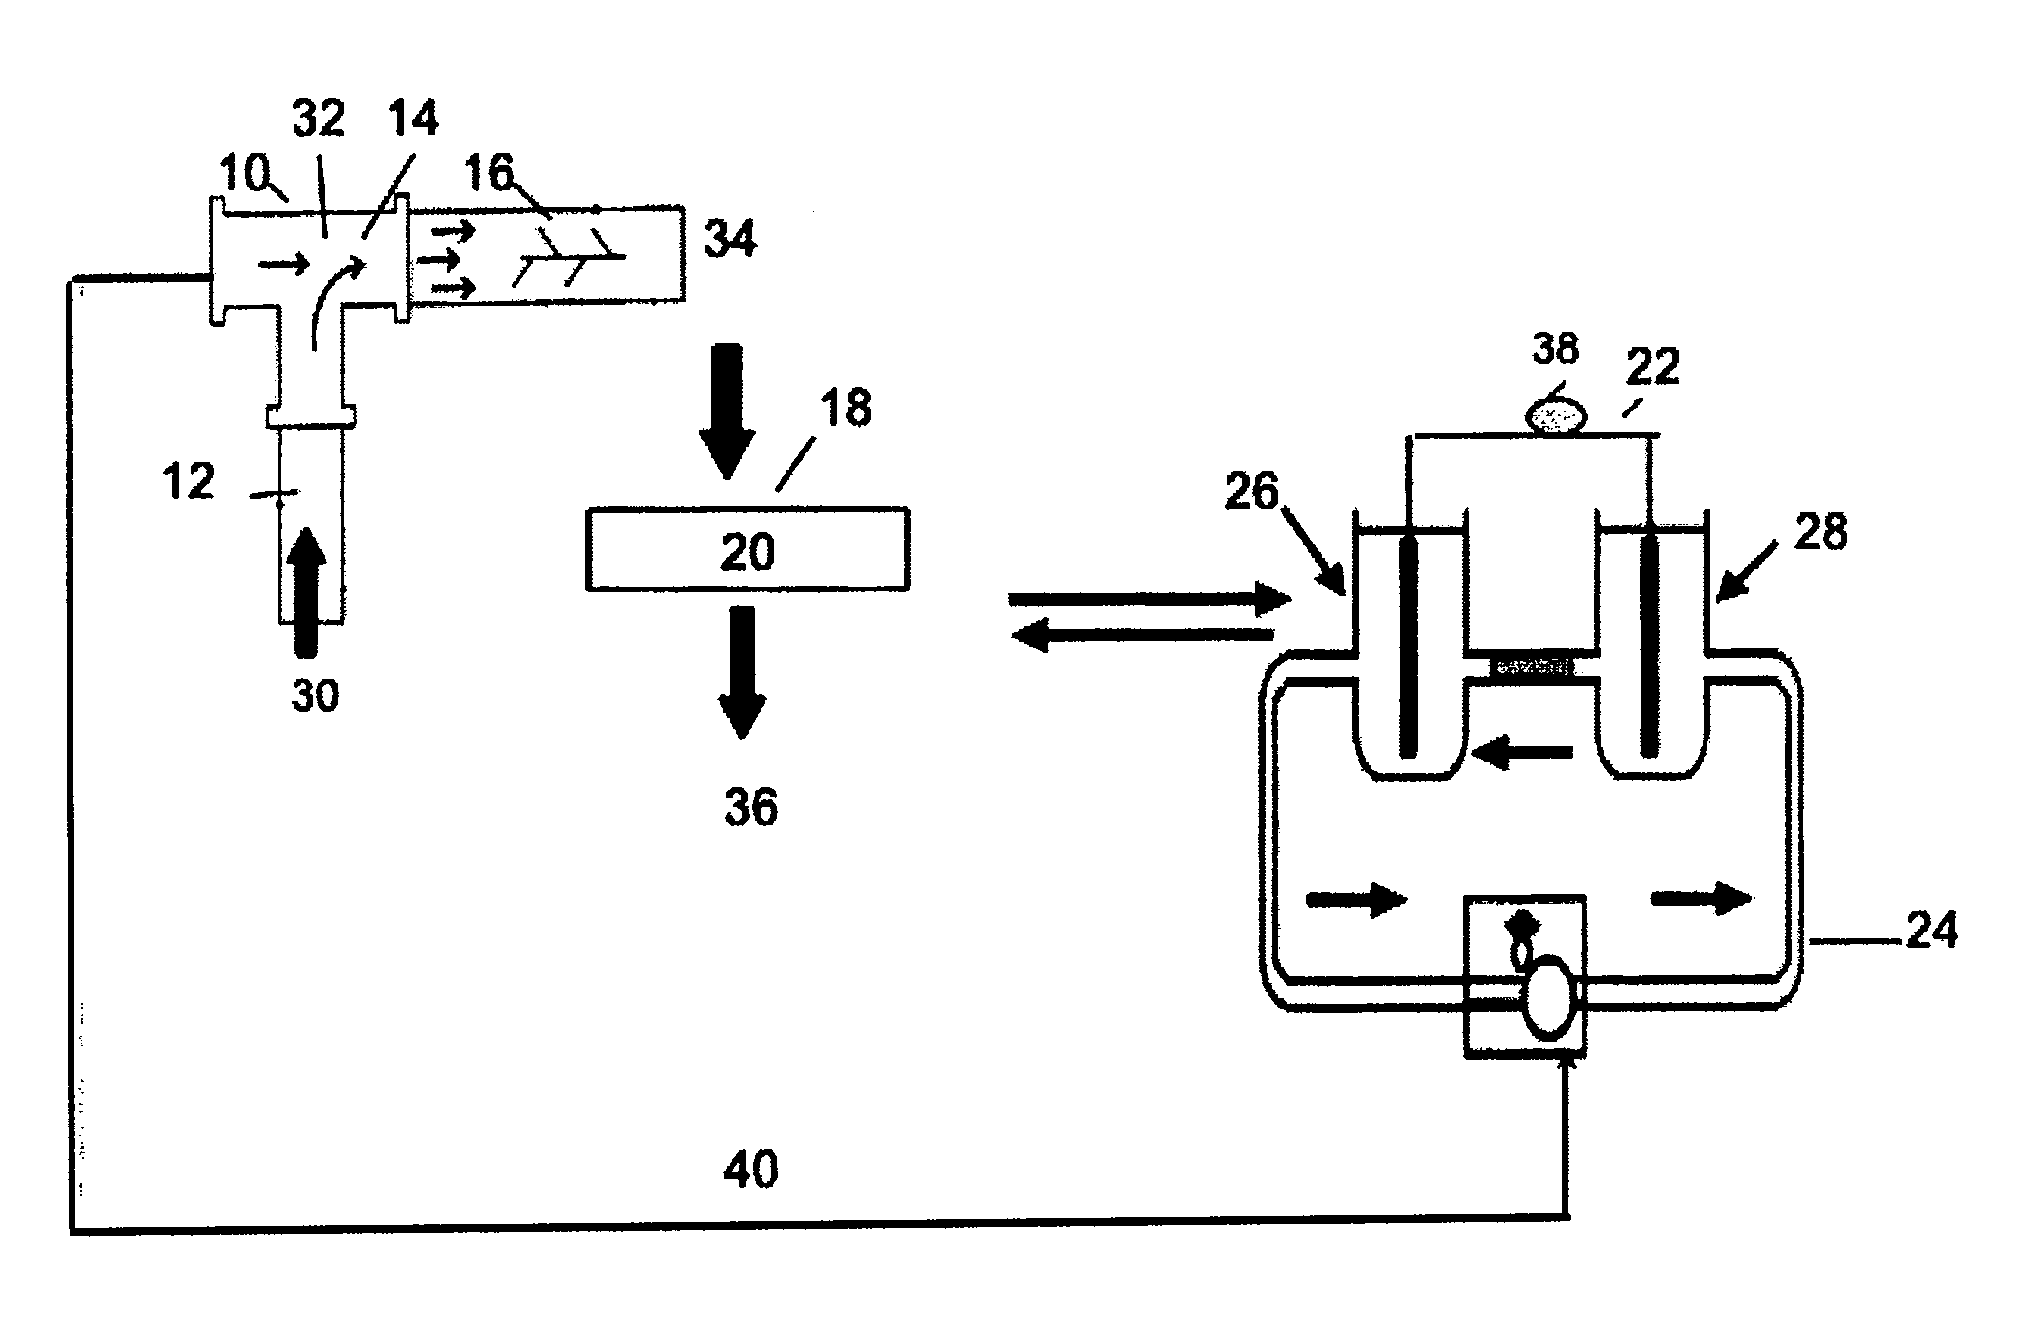 Method and System for Adsorbing Pollutants and/or Contaminants